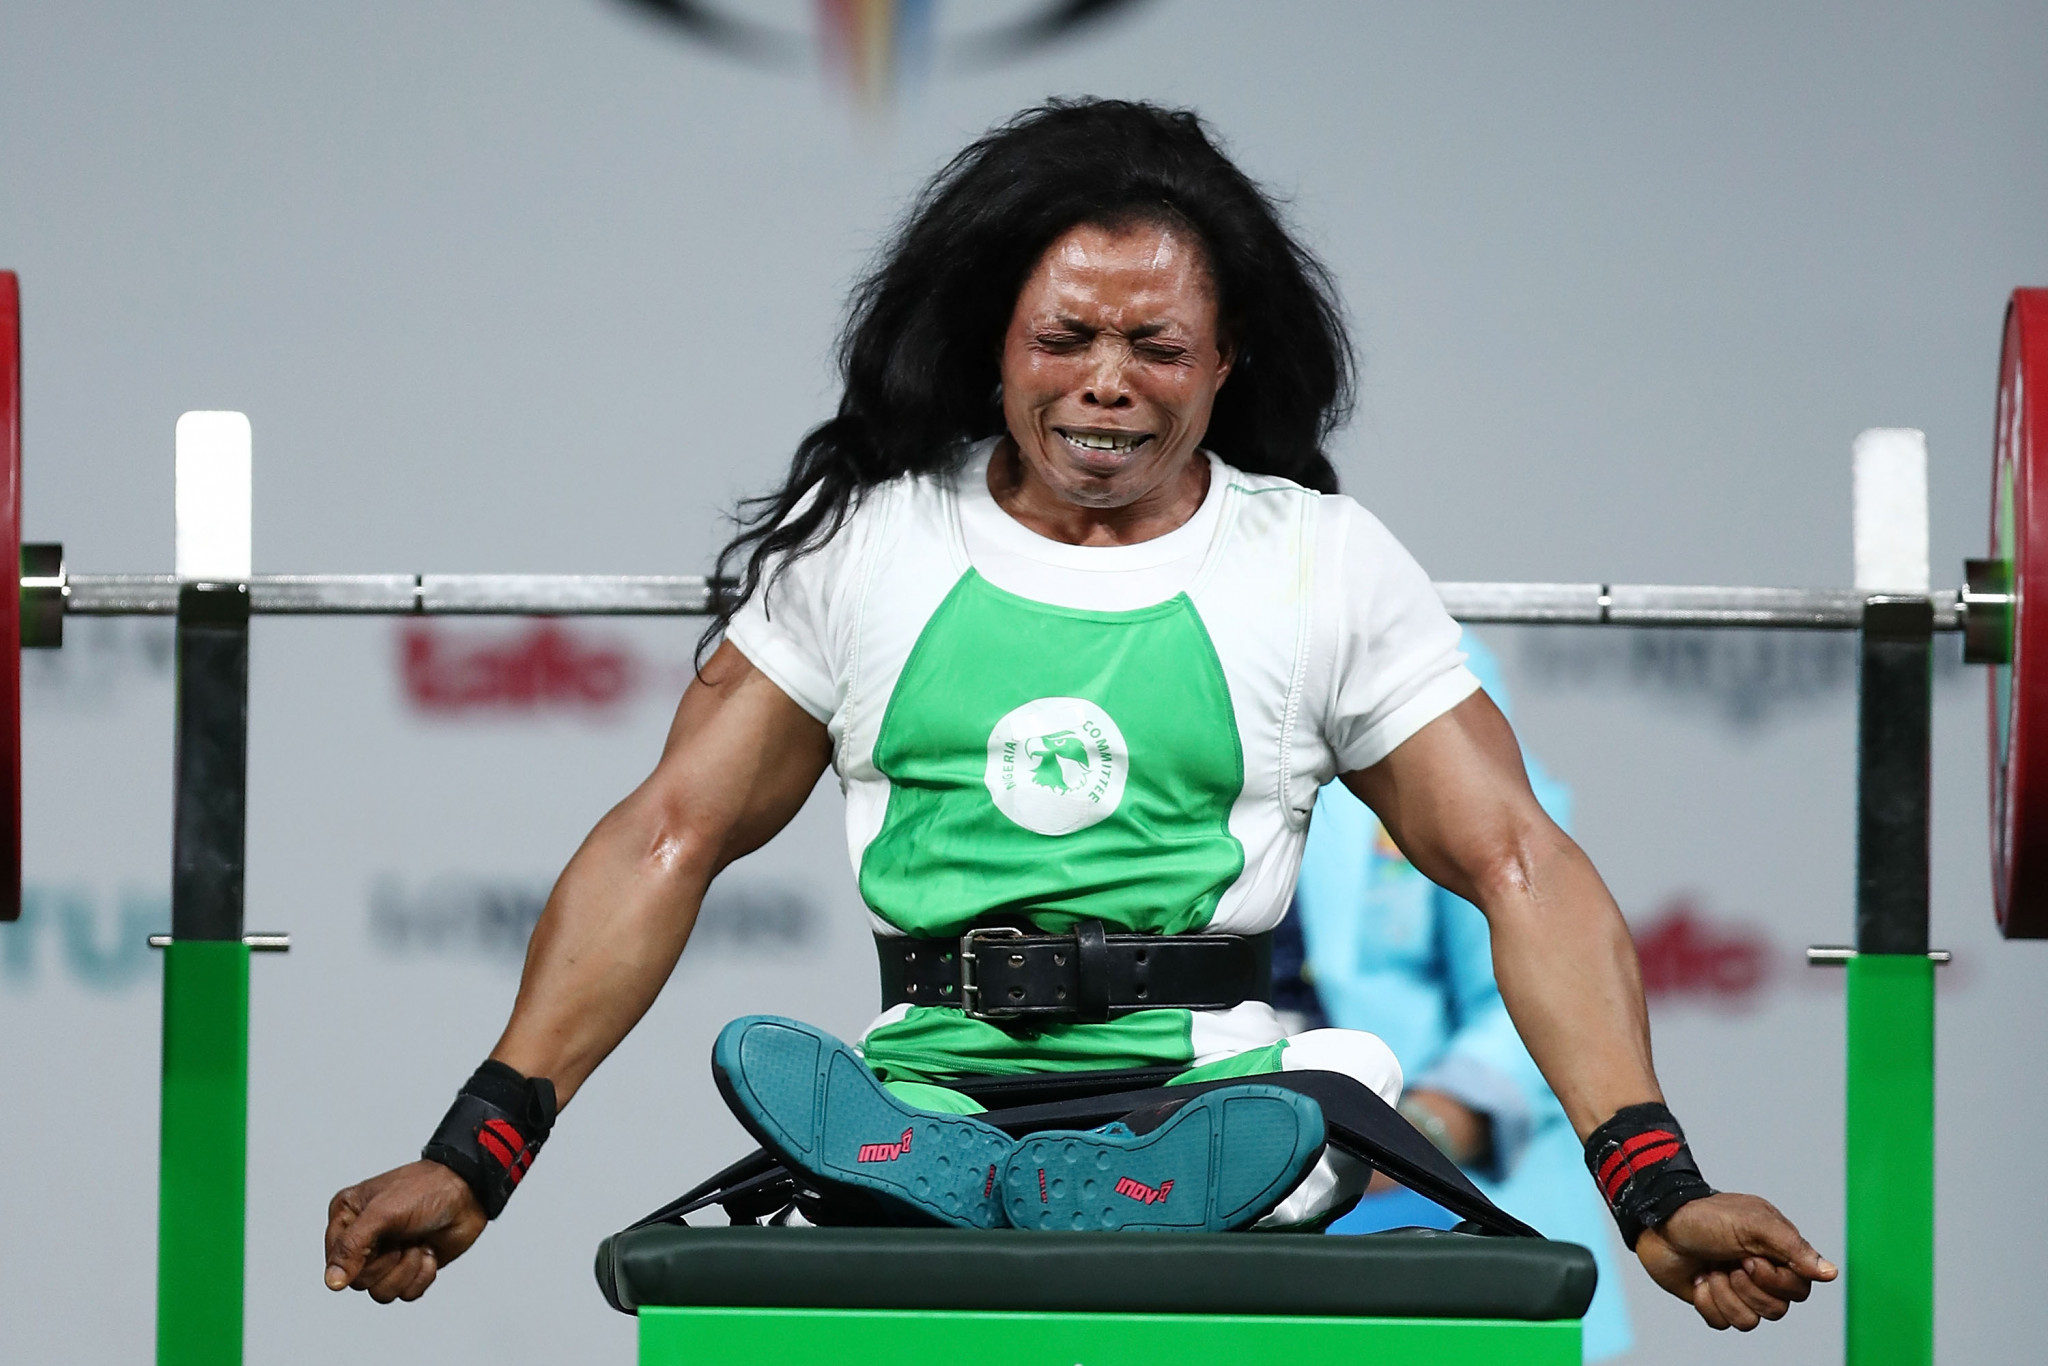 Oyema won gold medals at three consecutive Commonwealth Games, including at Gold Coast 2018 thanks to a world record lift ©Getty Images